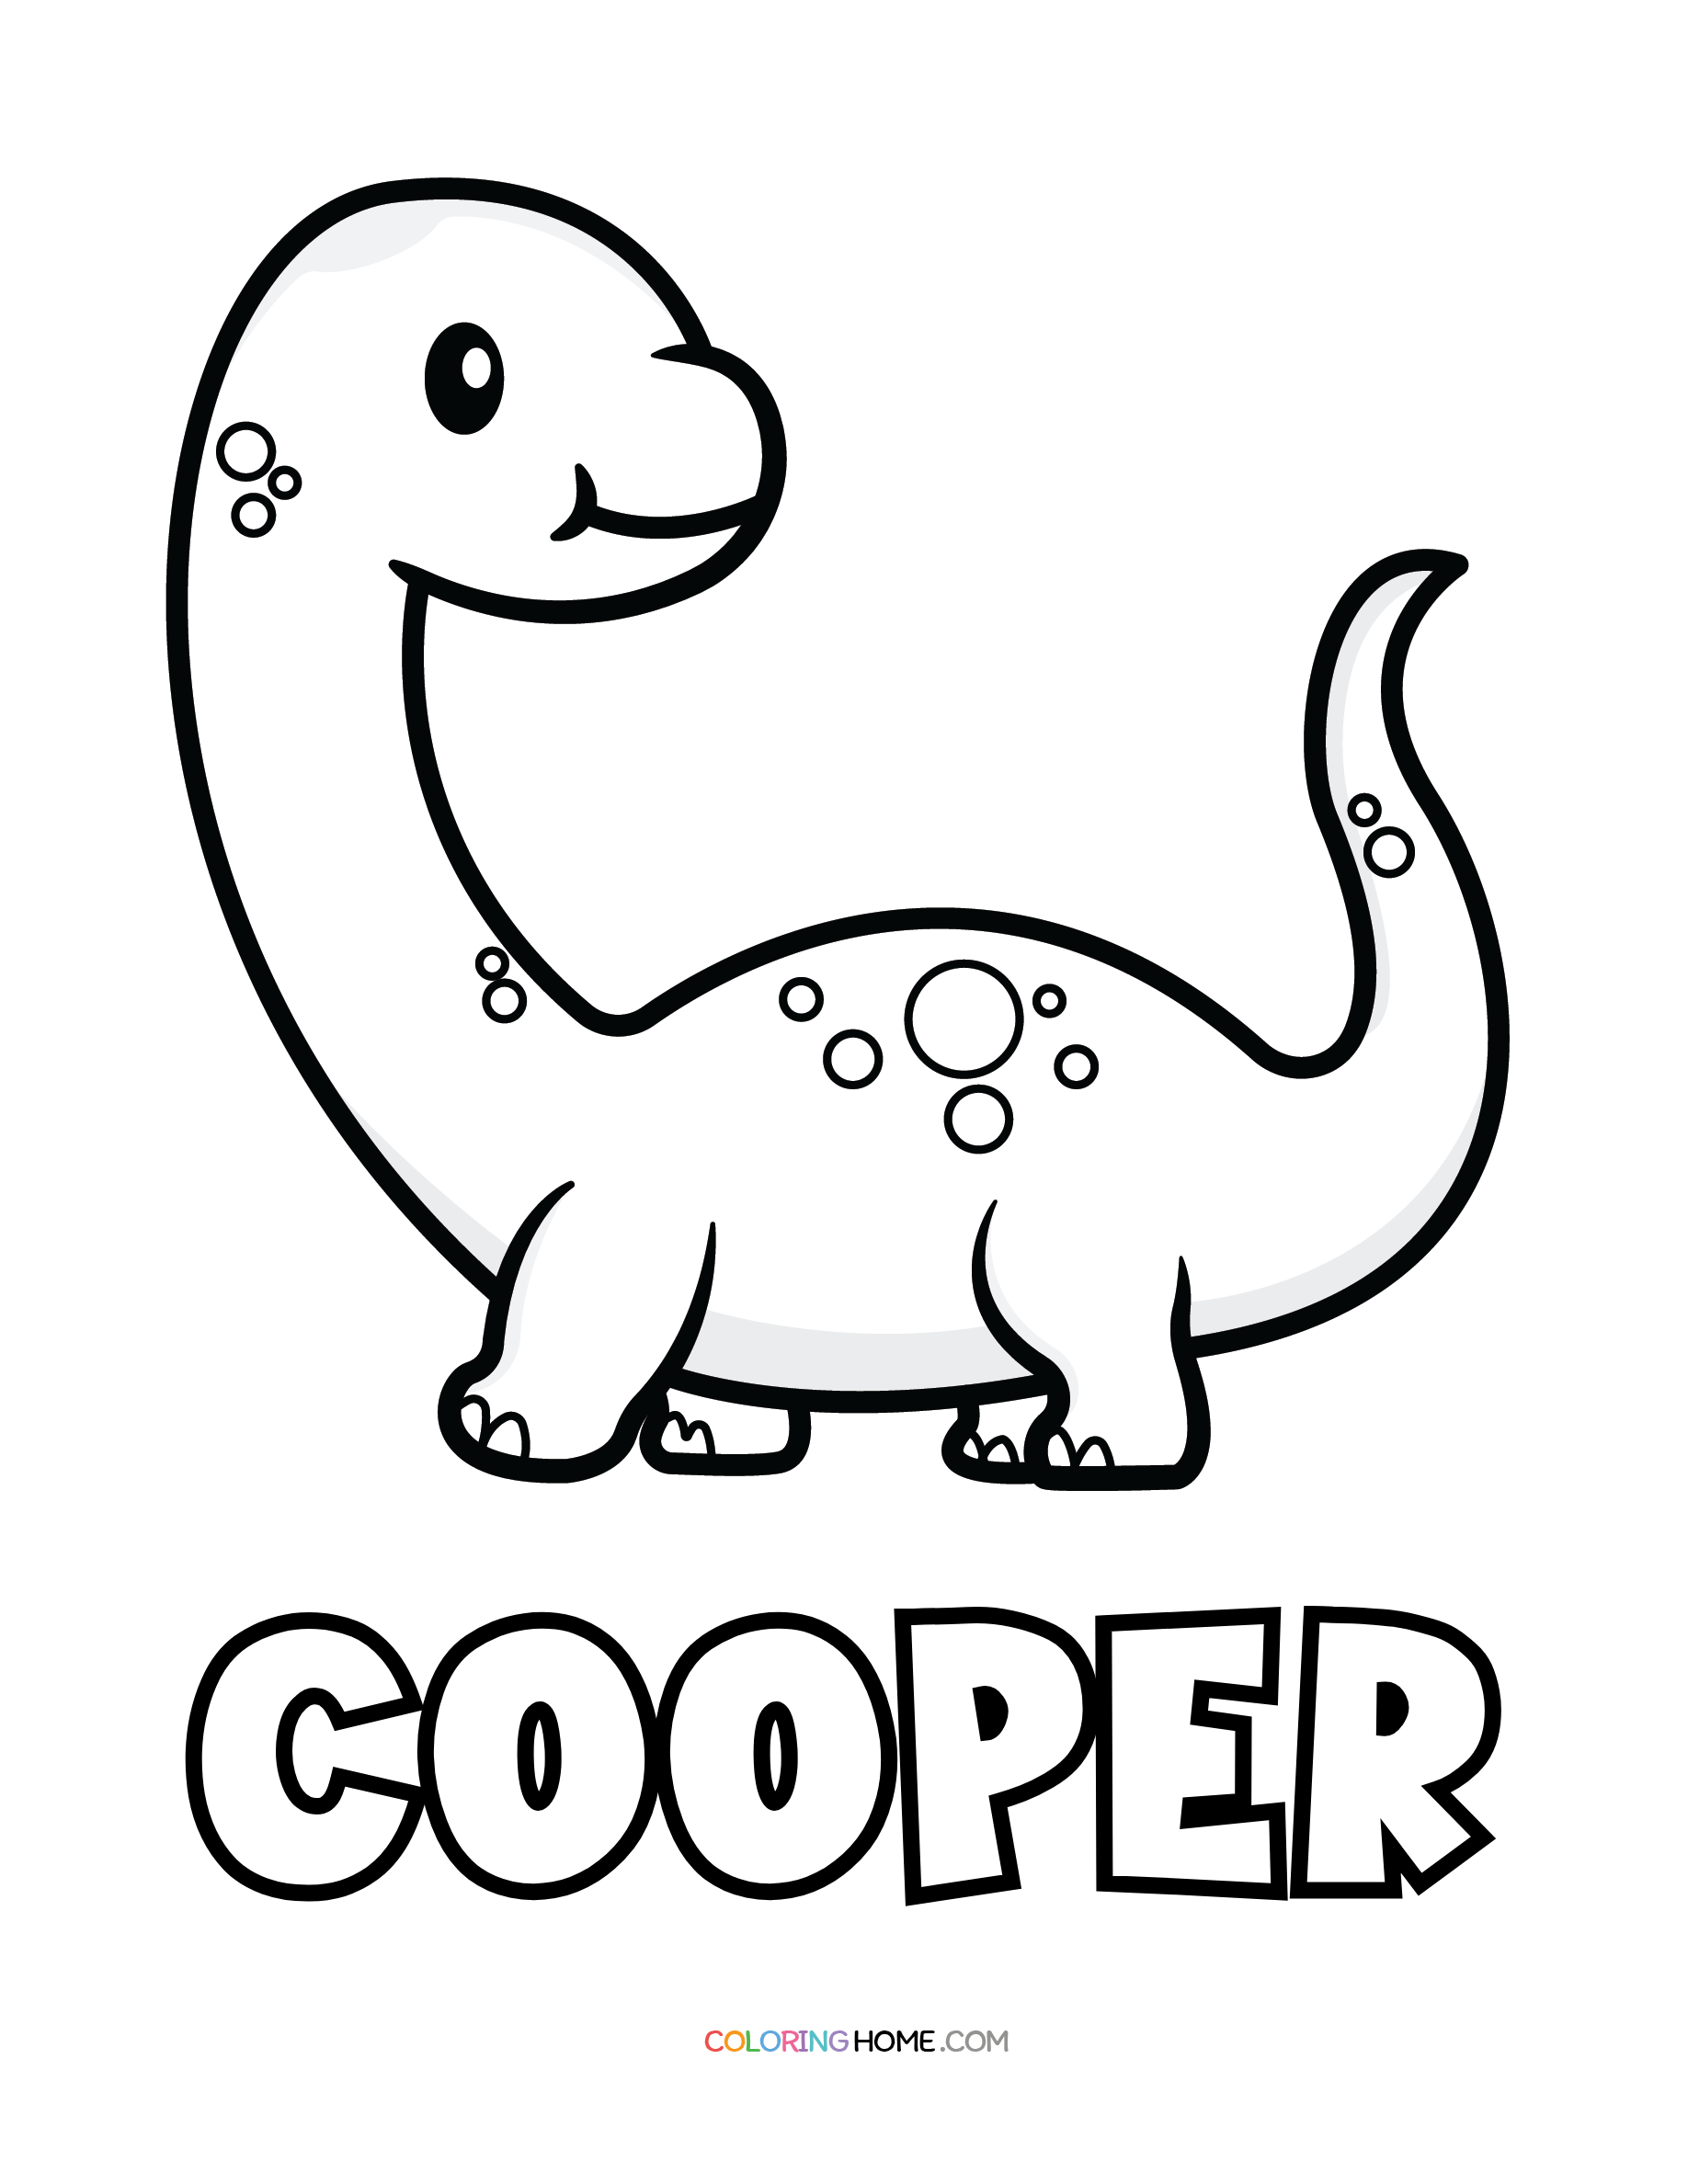 Cooper dinosaur coloring page